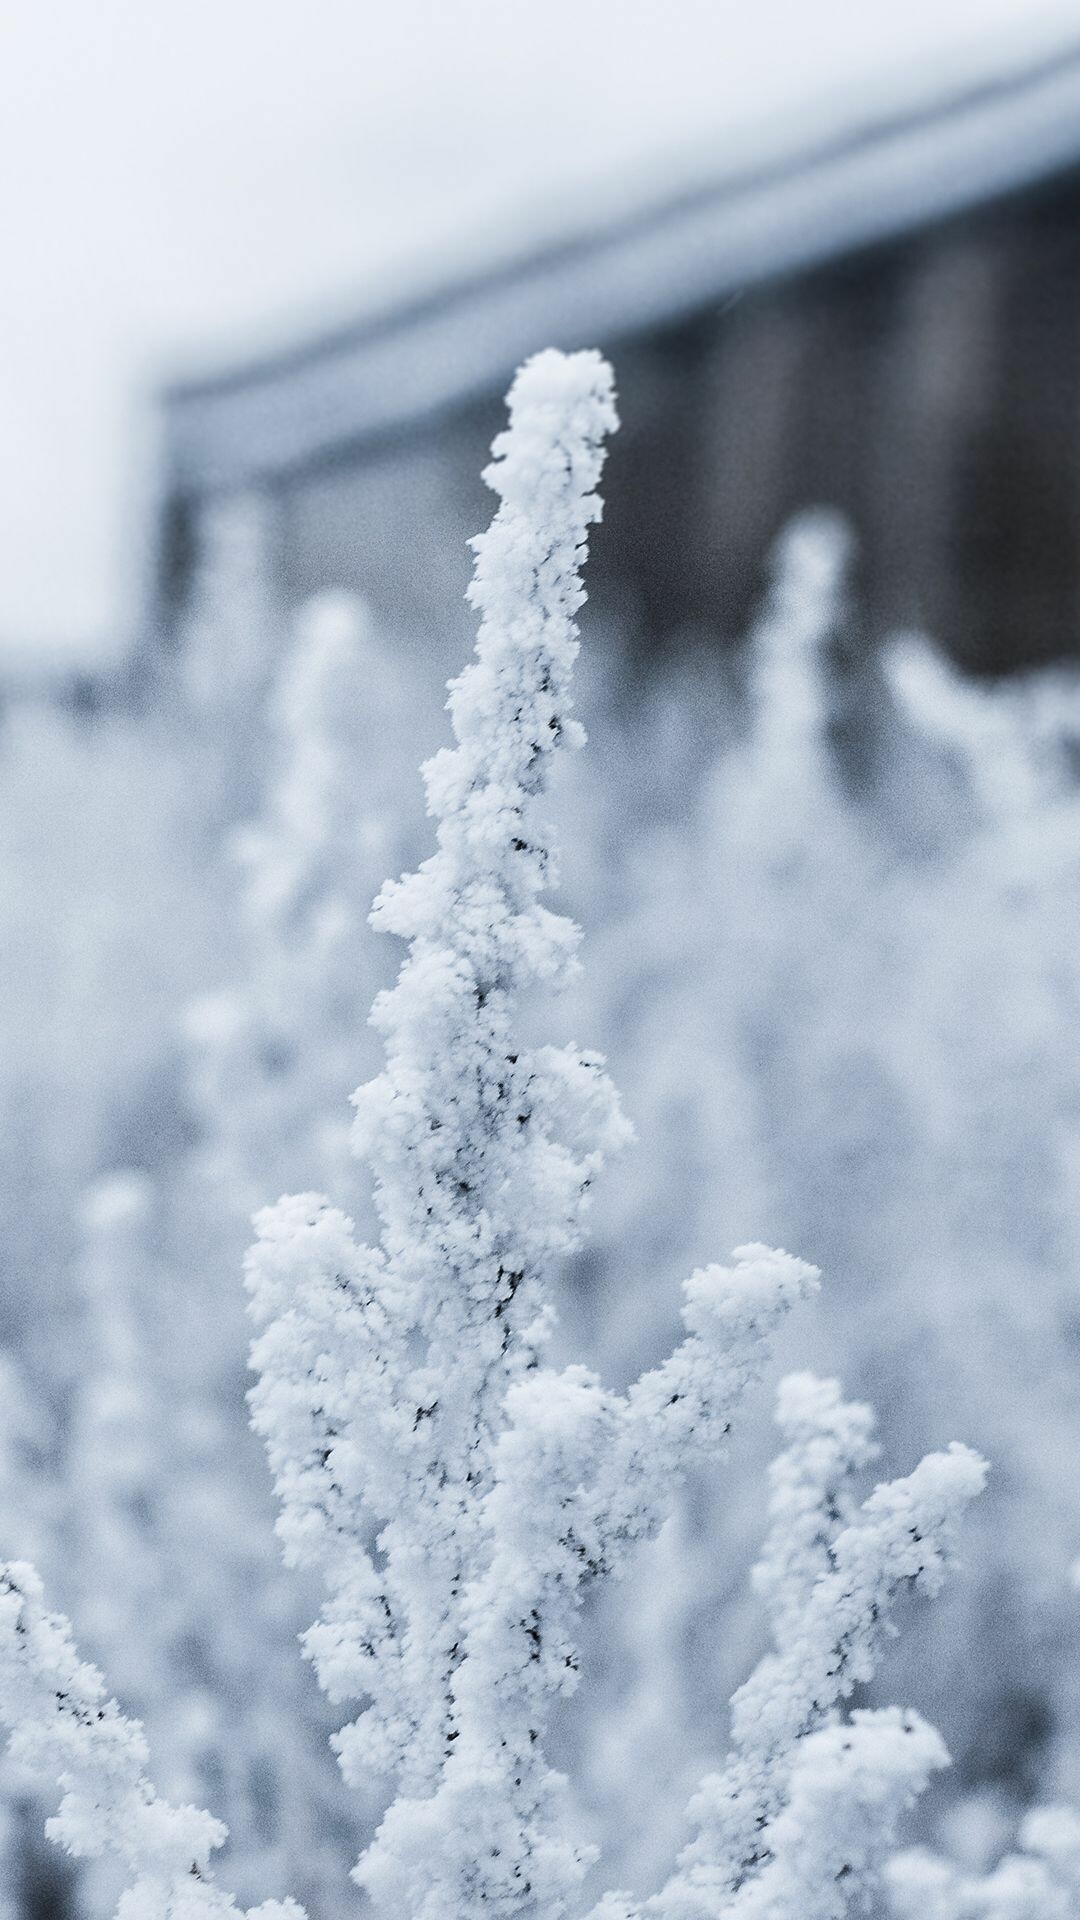 Winter: Rime ice, Supercooled water liquid droplets freeze onto surface. 1080x1920 Full HD Background.